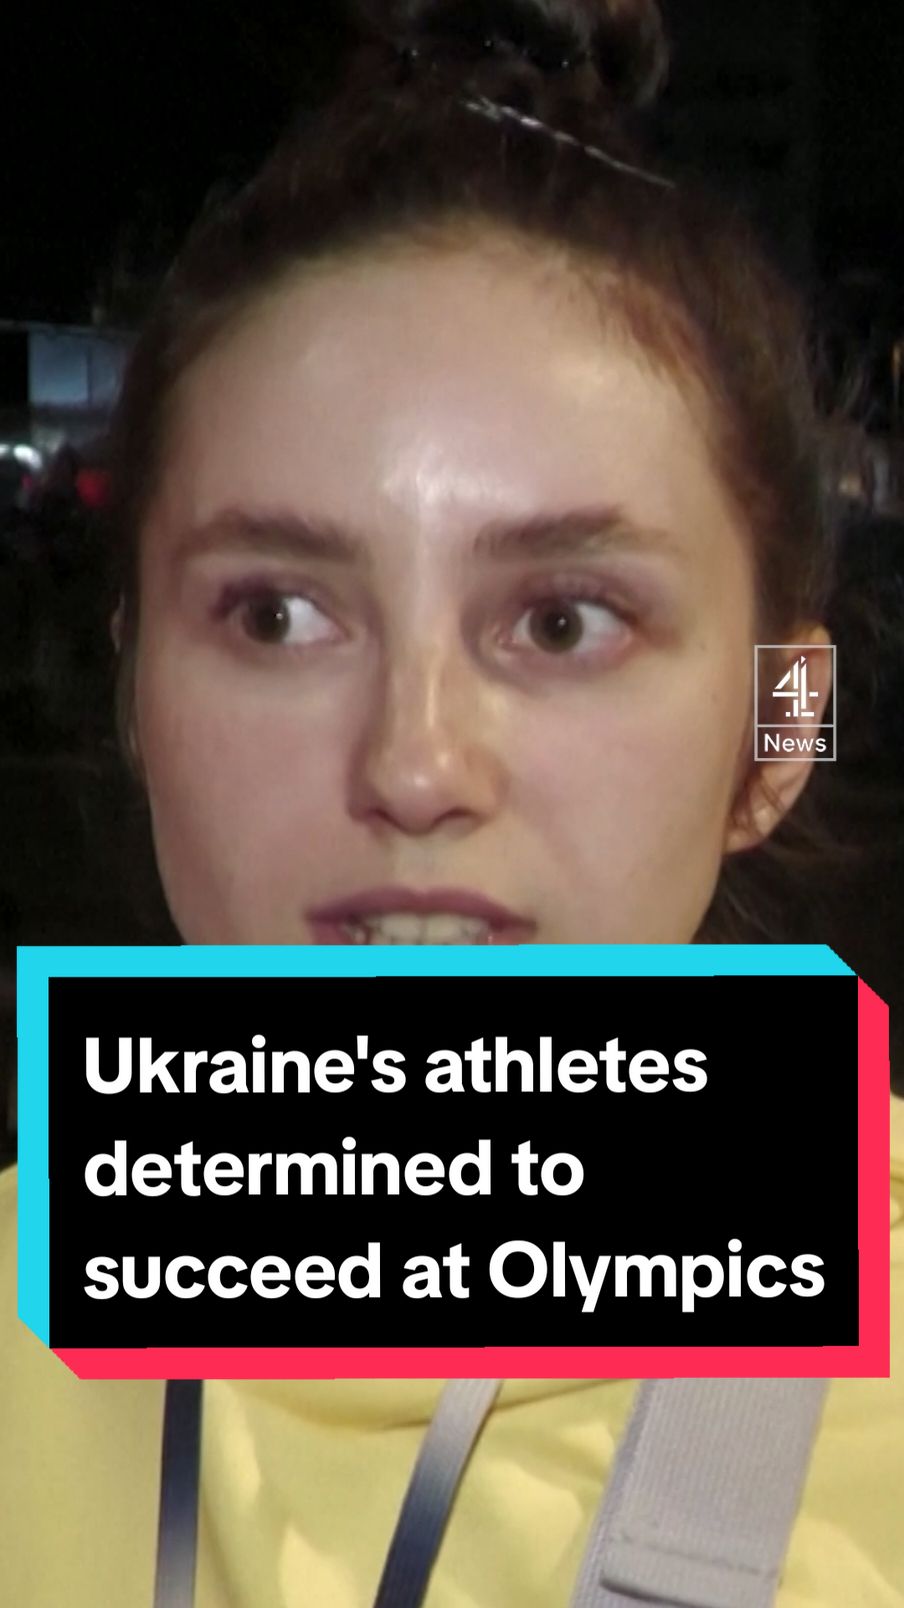 Ukrainian athletes are determined to succeed at the 2024 Olympics and say that Ukraine is "unbreakable, even in conditions of war" #Ukraine #Olympics2024 #OlympicGamesParis #fyp #Athletes #channel4news